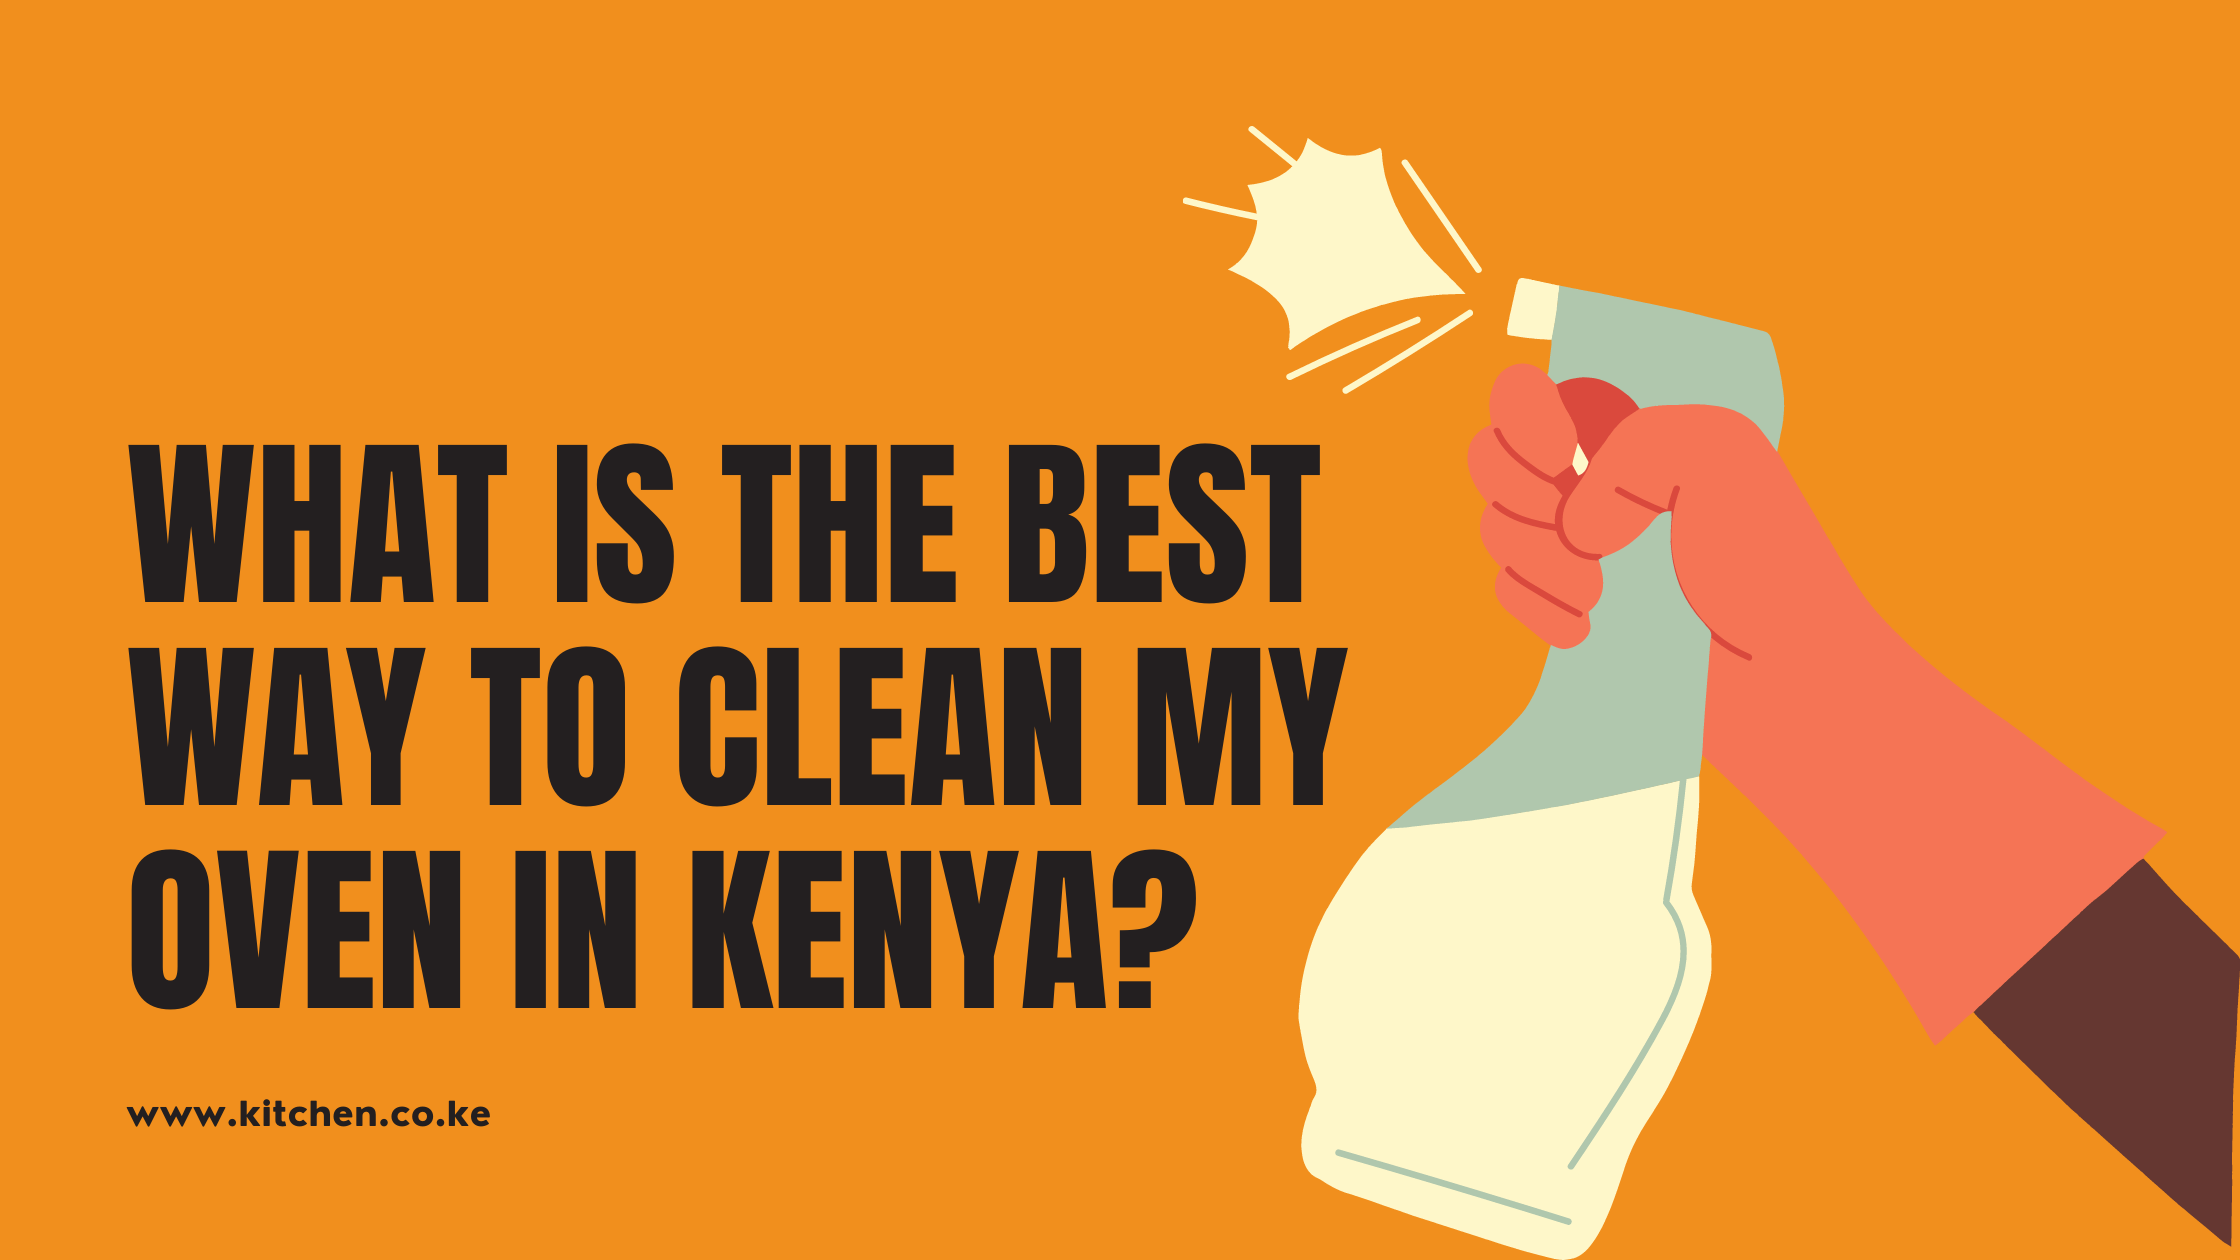 What Is The Best Way To Clean My Oven In Kenya?